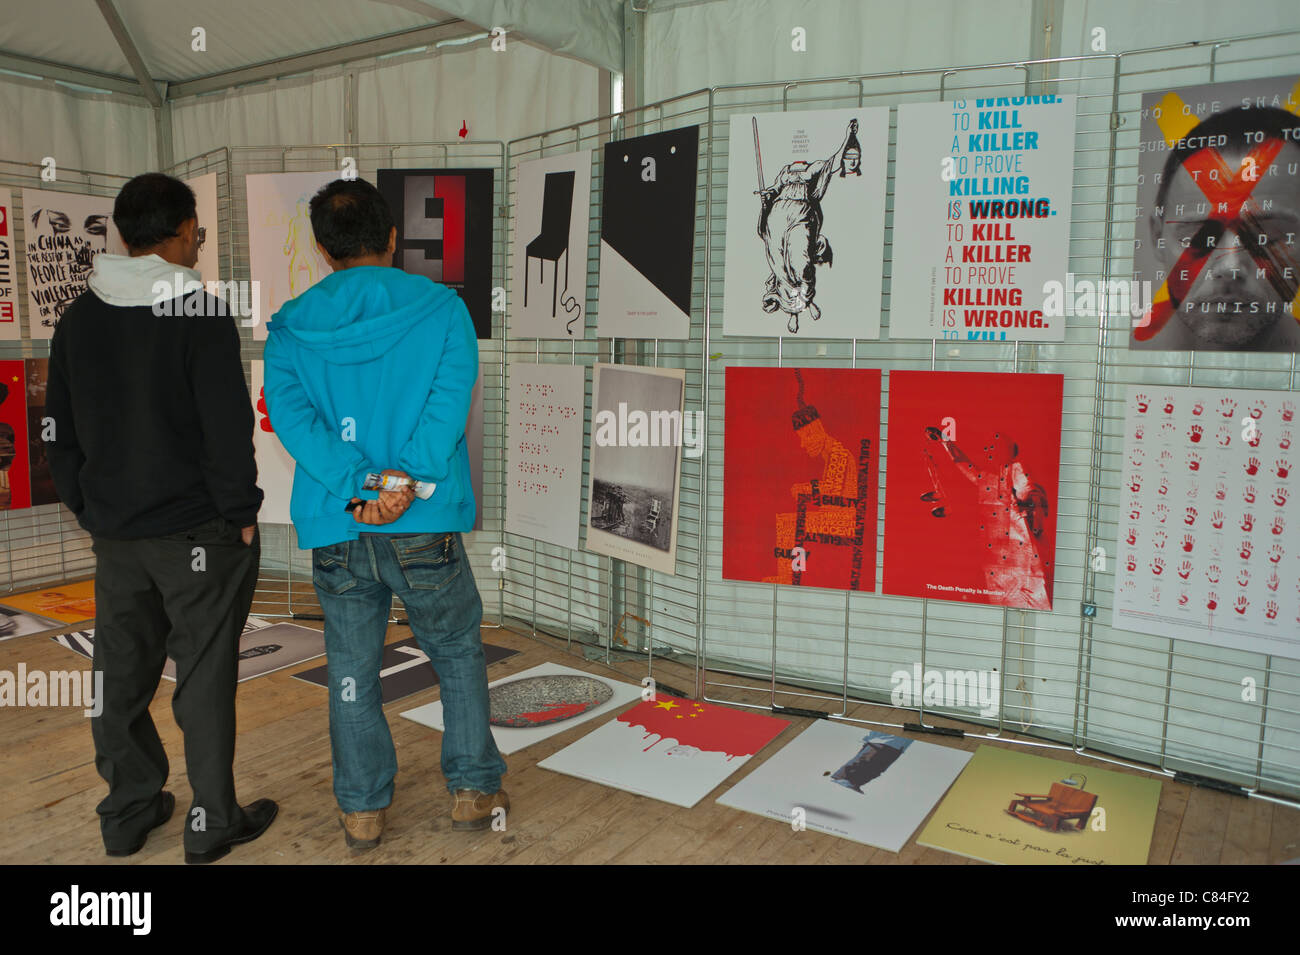 Paris, France. Public Visiting Posters on wall, Public Exhibit outside in a protest against the death penalty. protest art Stock Photo